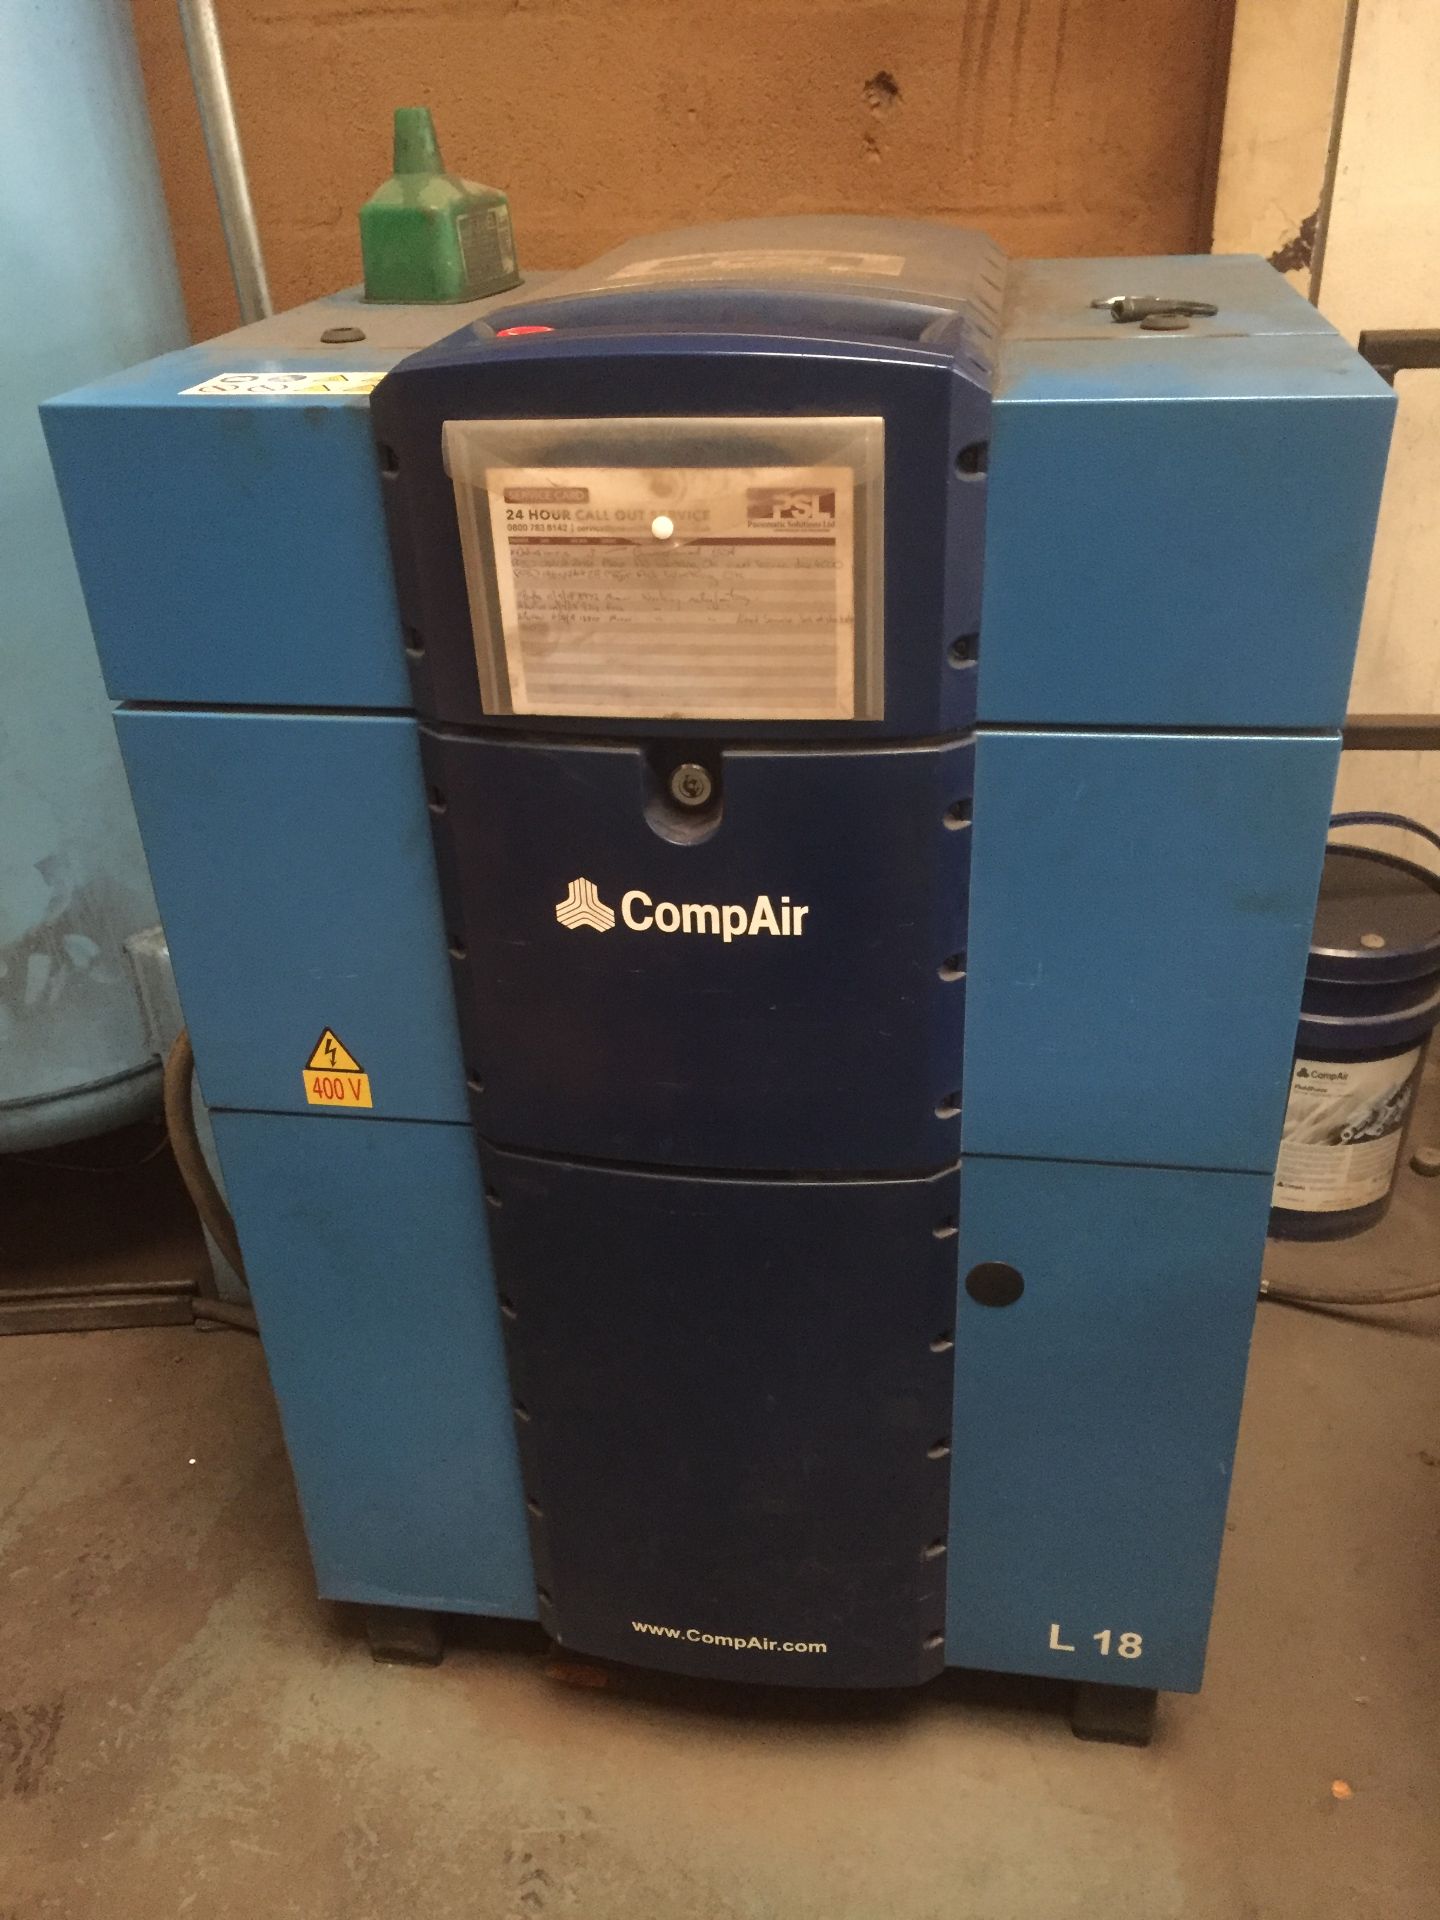 Compair L18-13A rotary screw air compressor, Serial No. CD10022707001 (2016), 13 BAR, with Abbot and